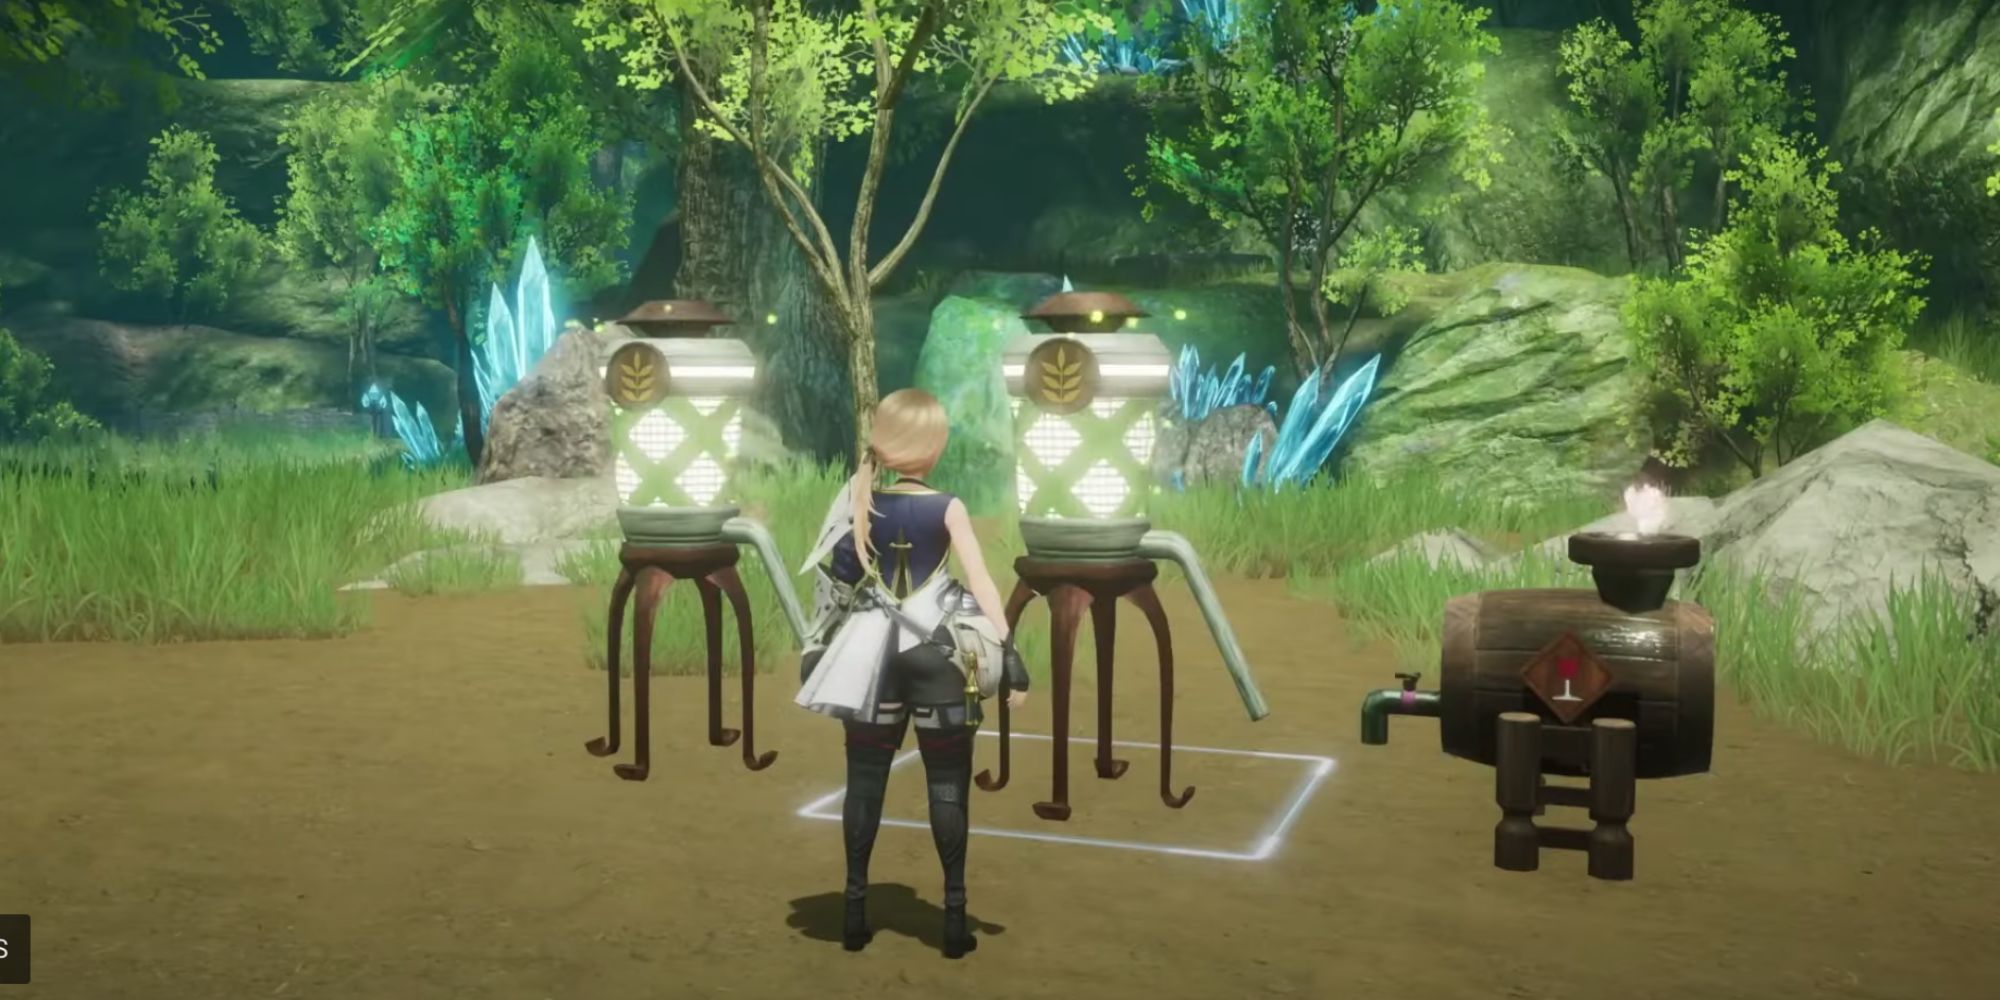 Start of game character standing next to glowing jars